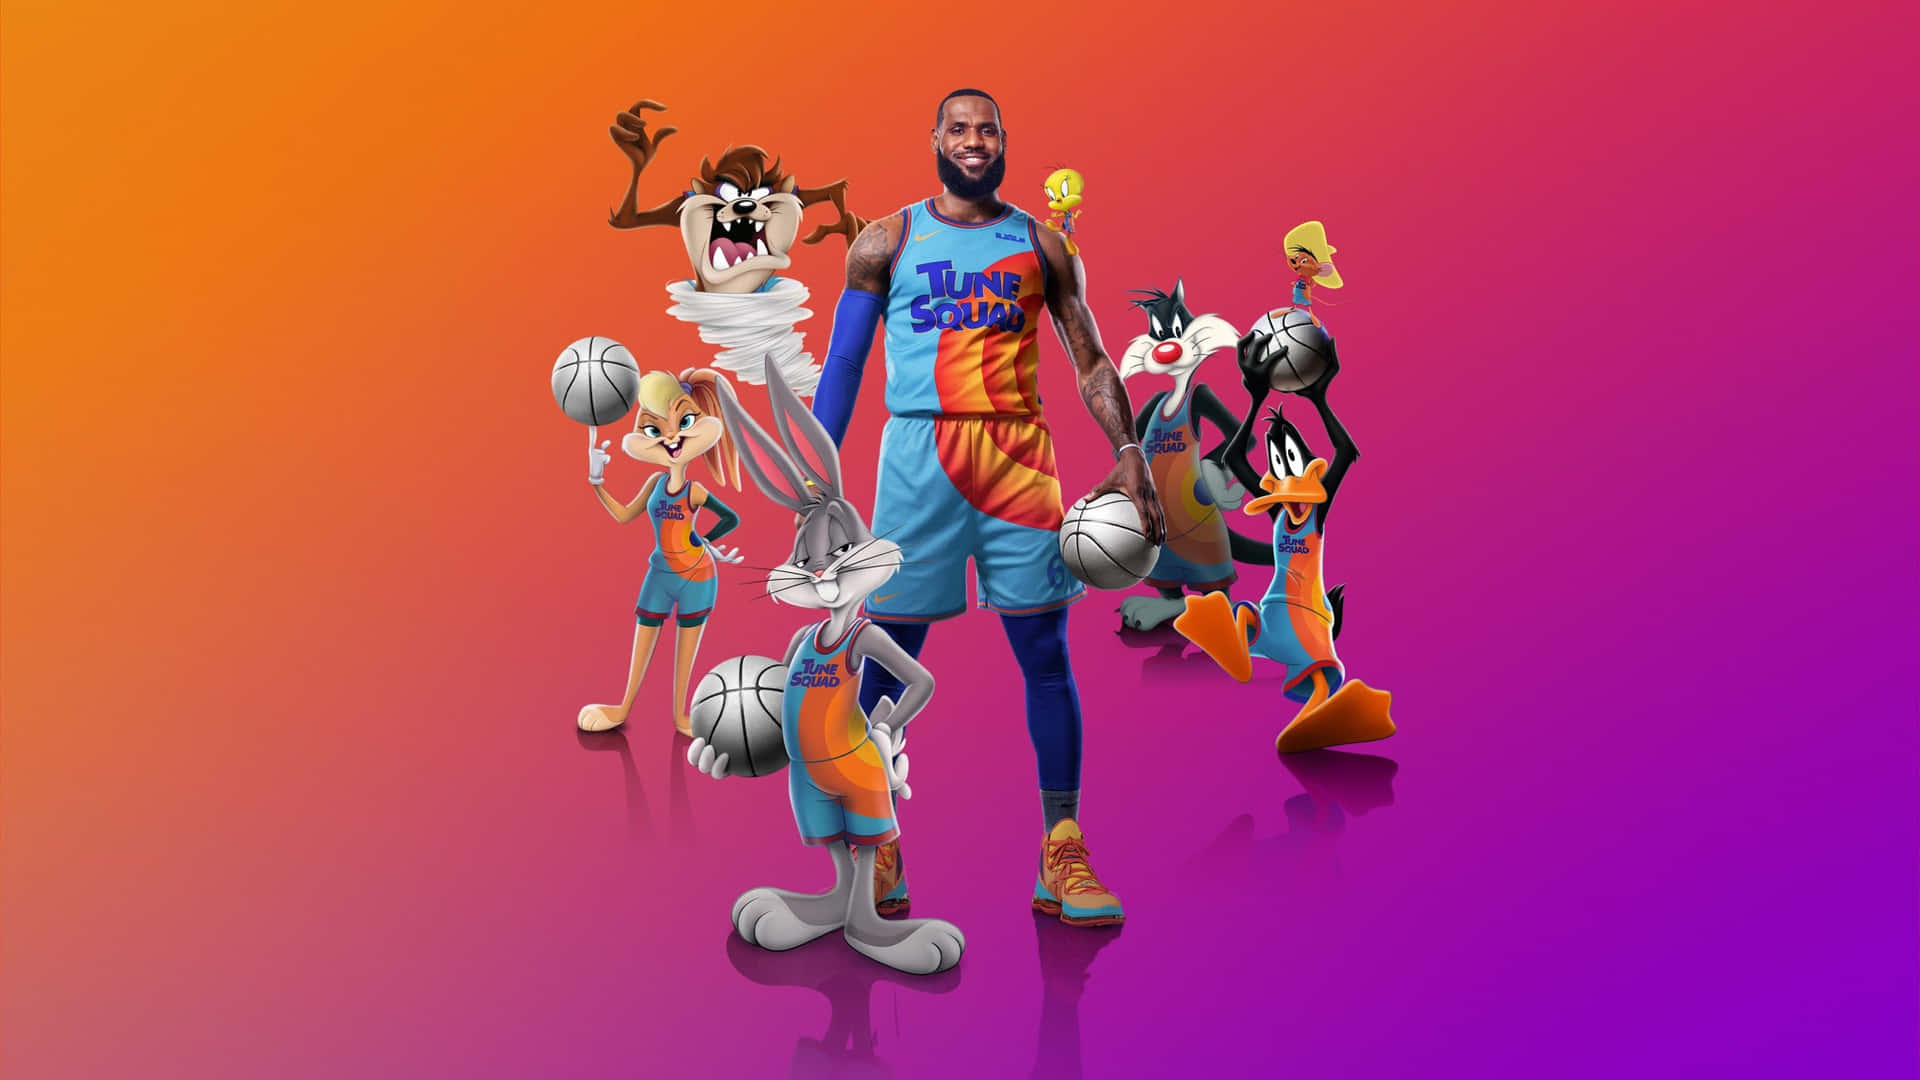 "Celebrate with Space Jam in Style!" Wallpaper